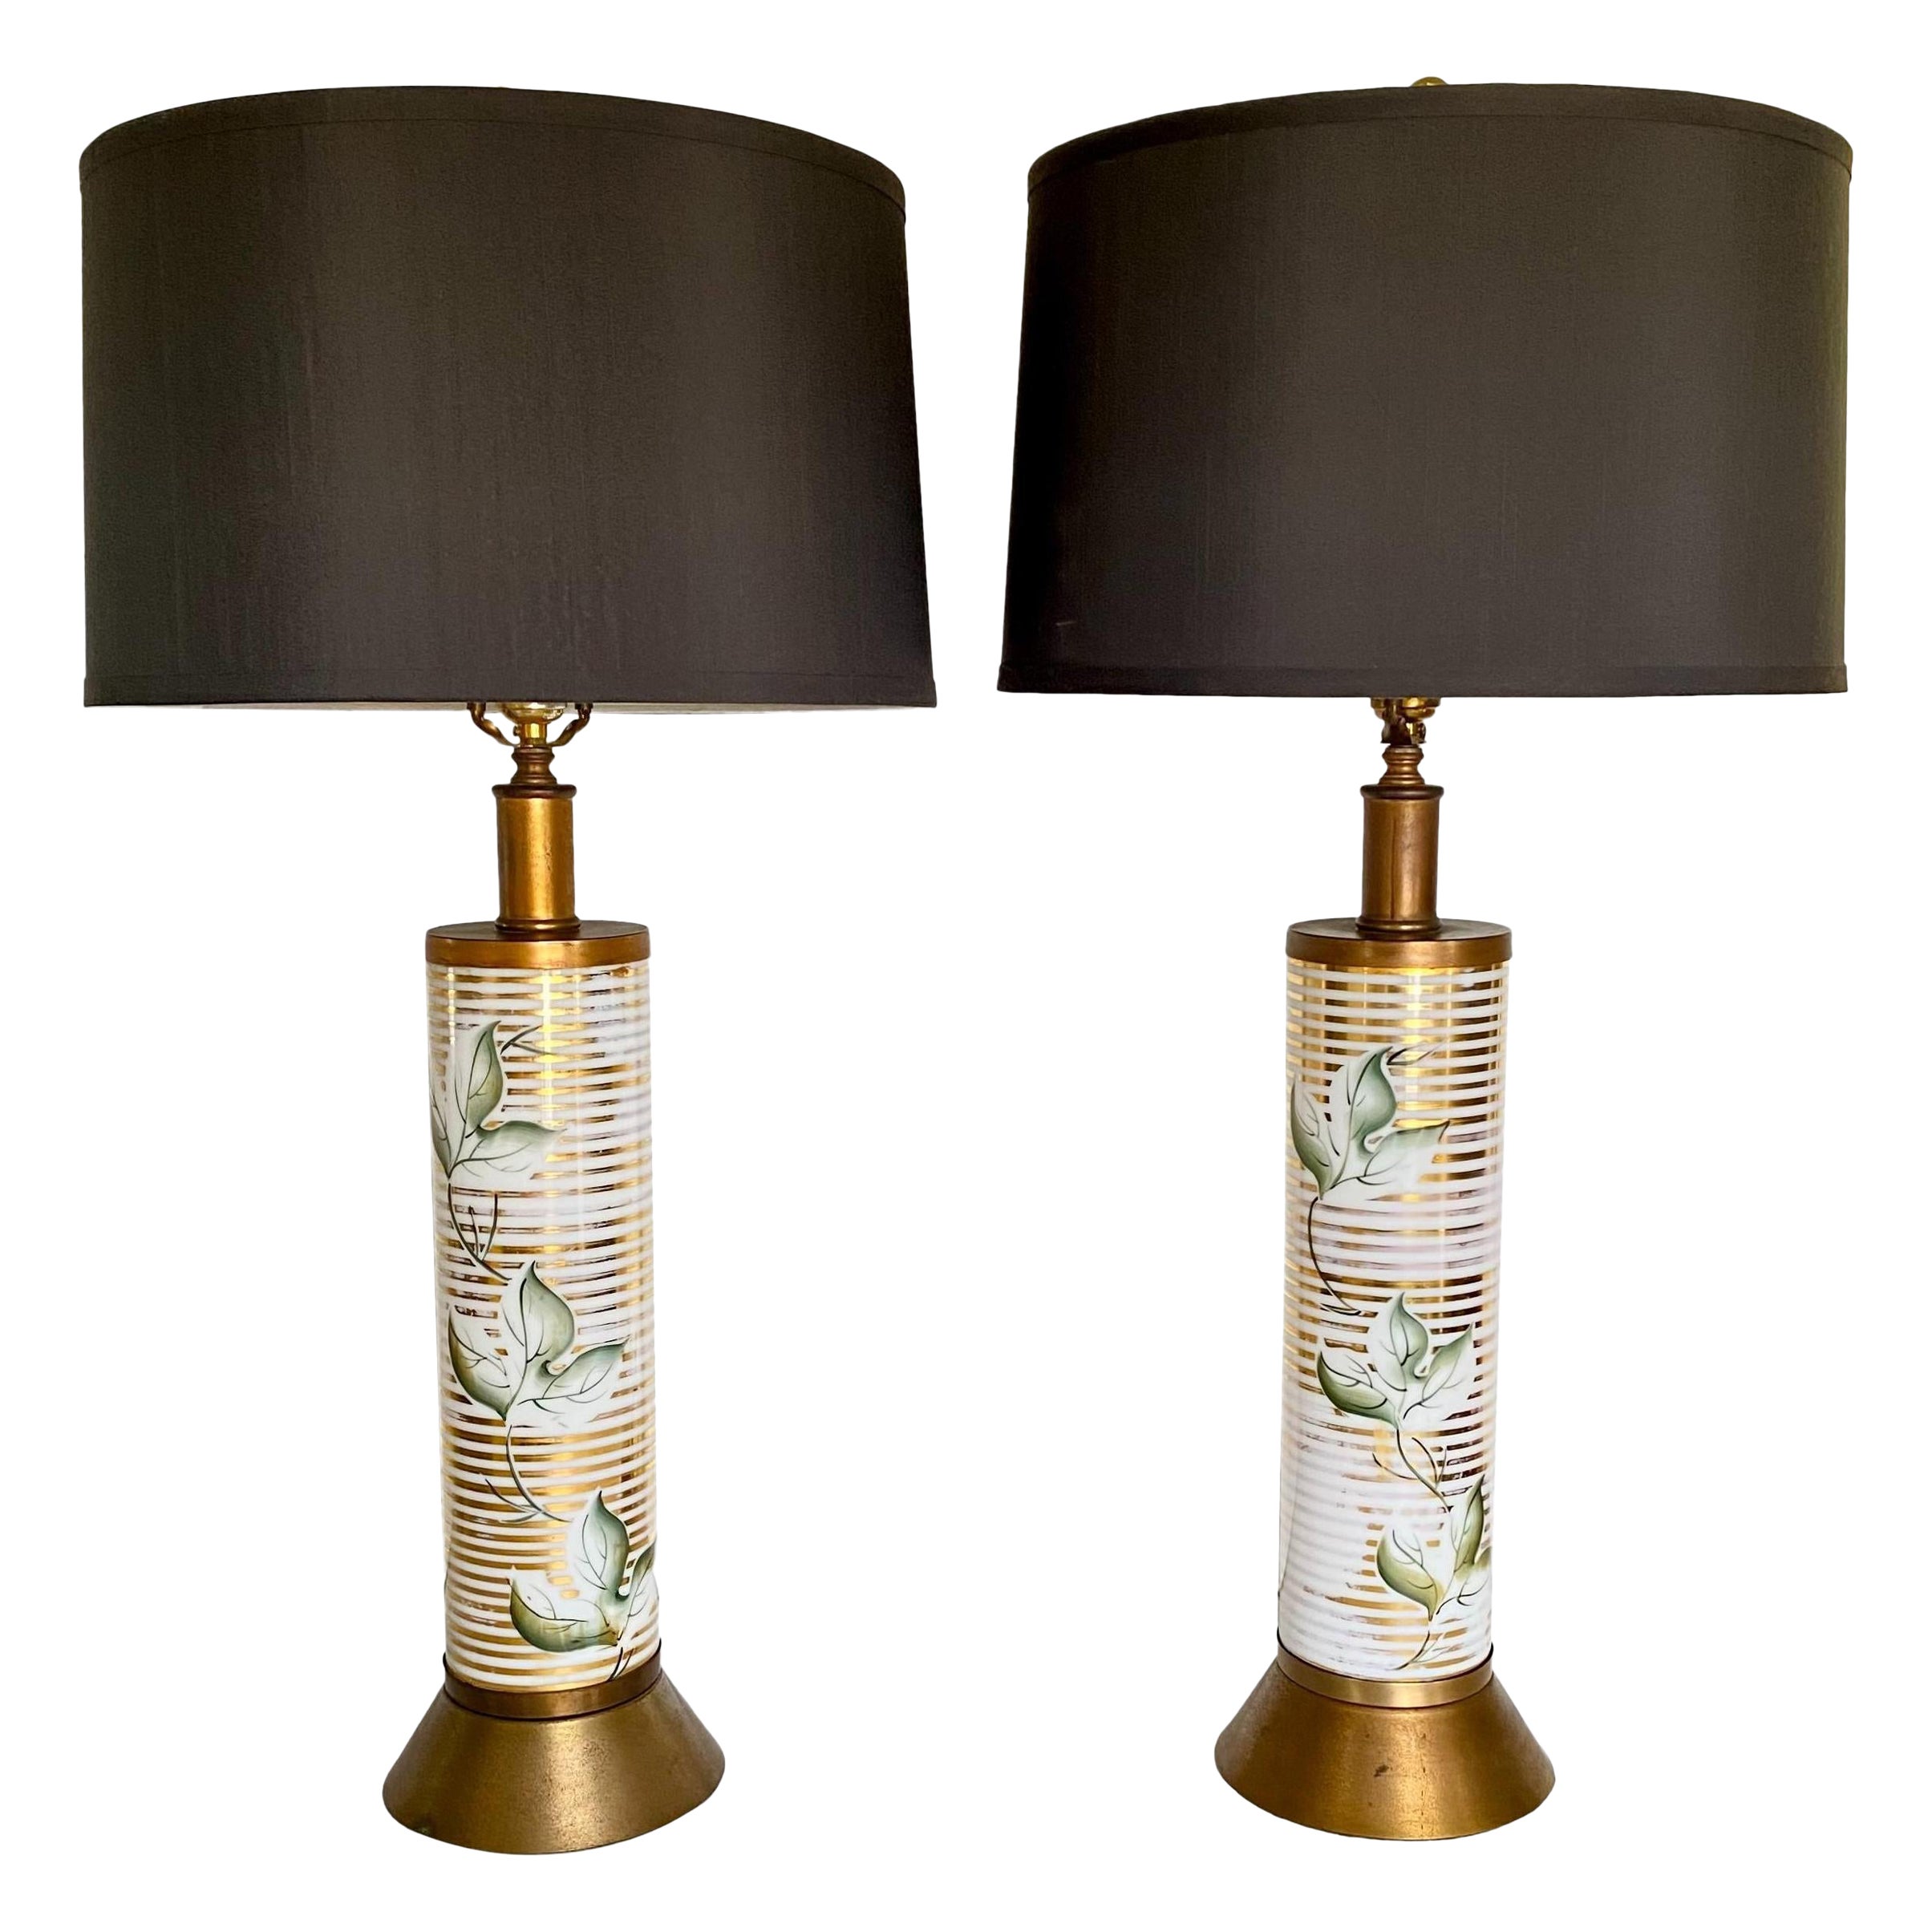 1960s, Hand Painted & Gilded Ceramic Pillar Lamps, a Pair